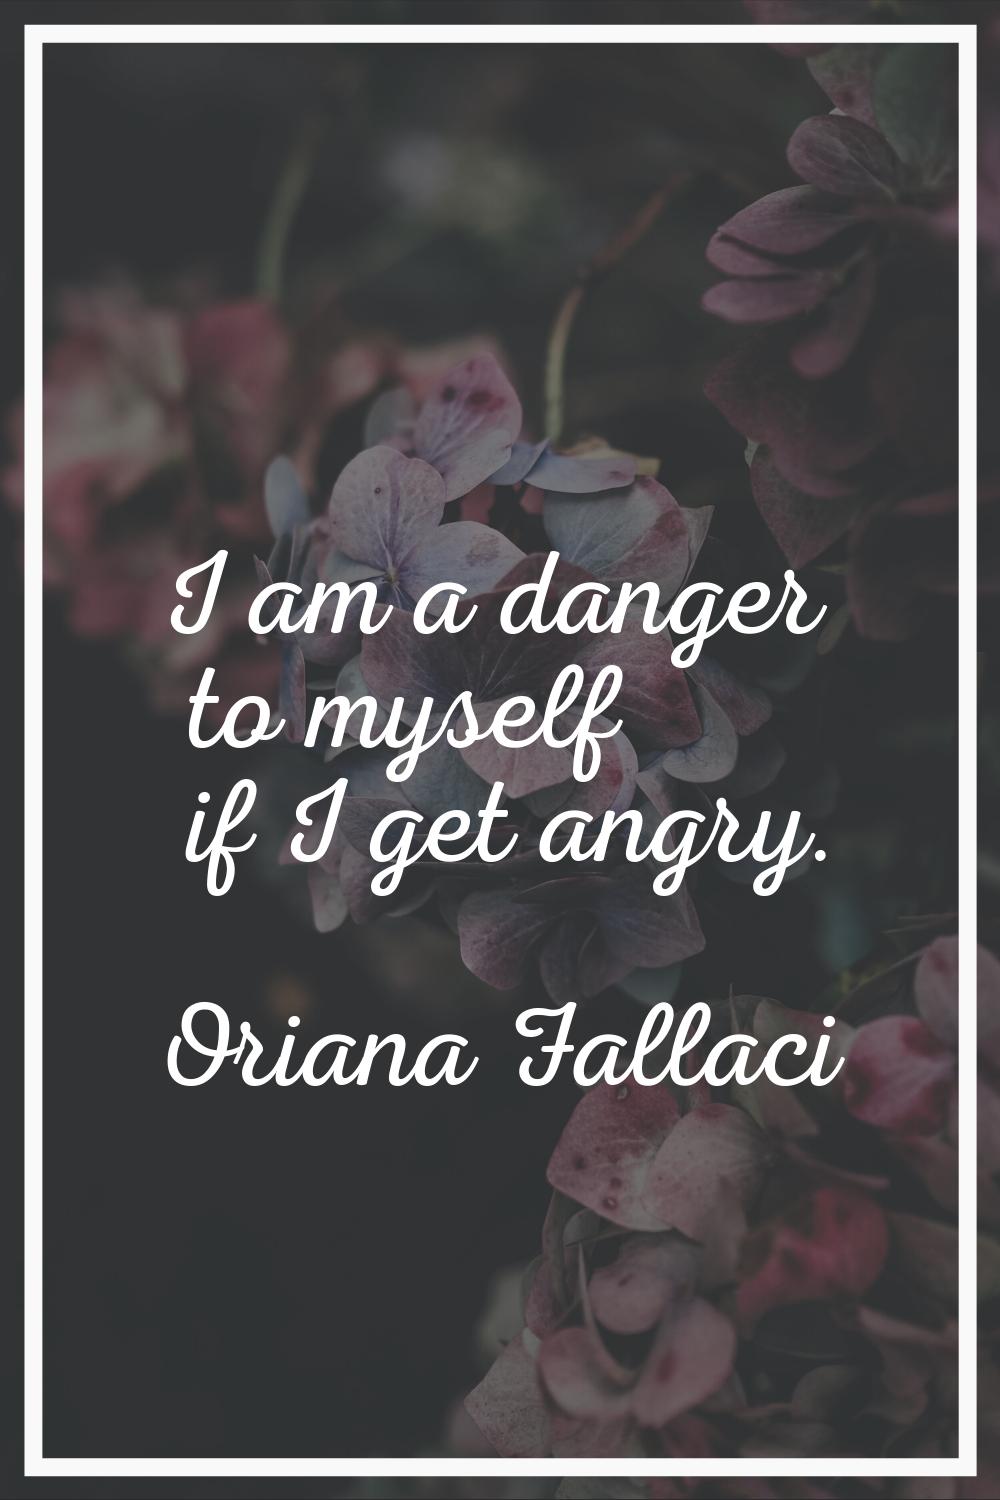 I am a danger to myself if I get angry.